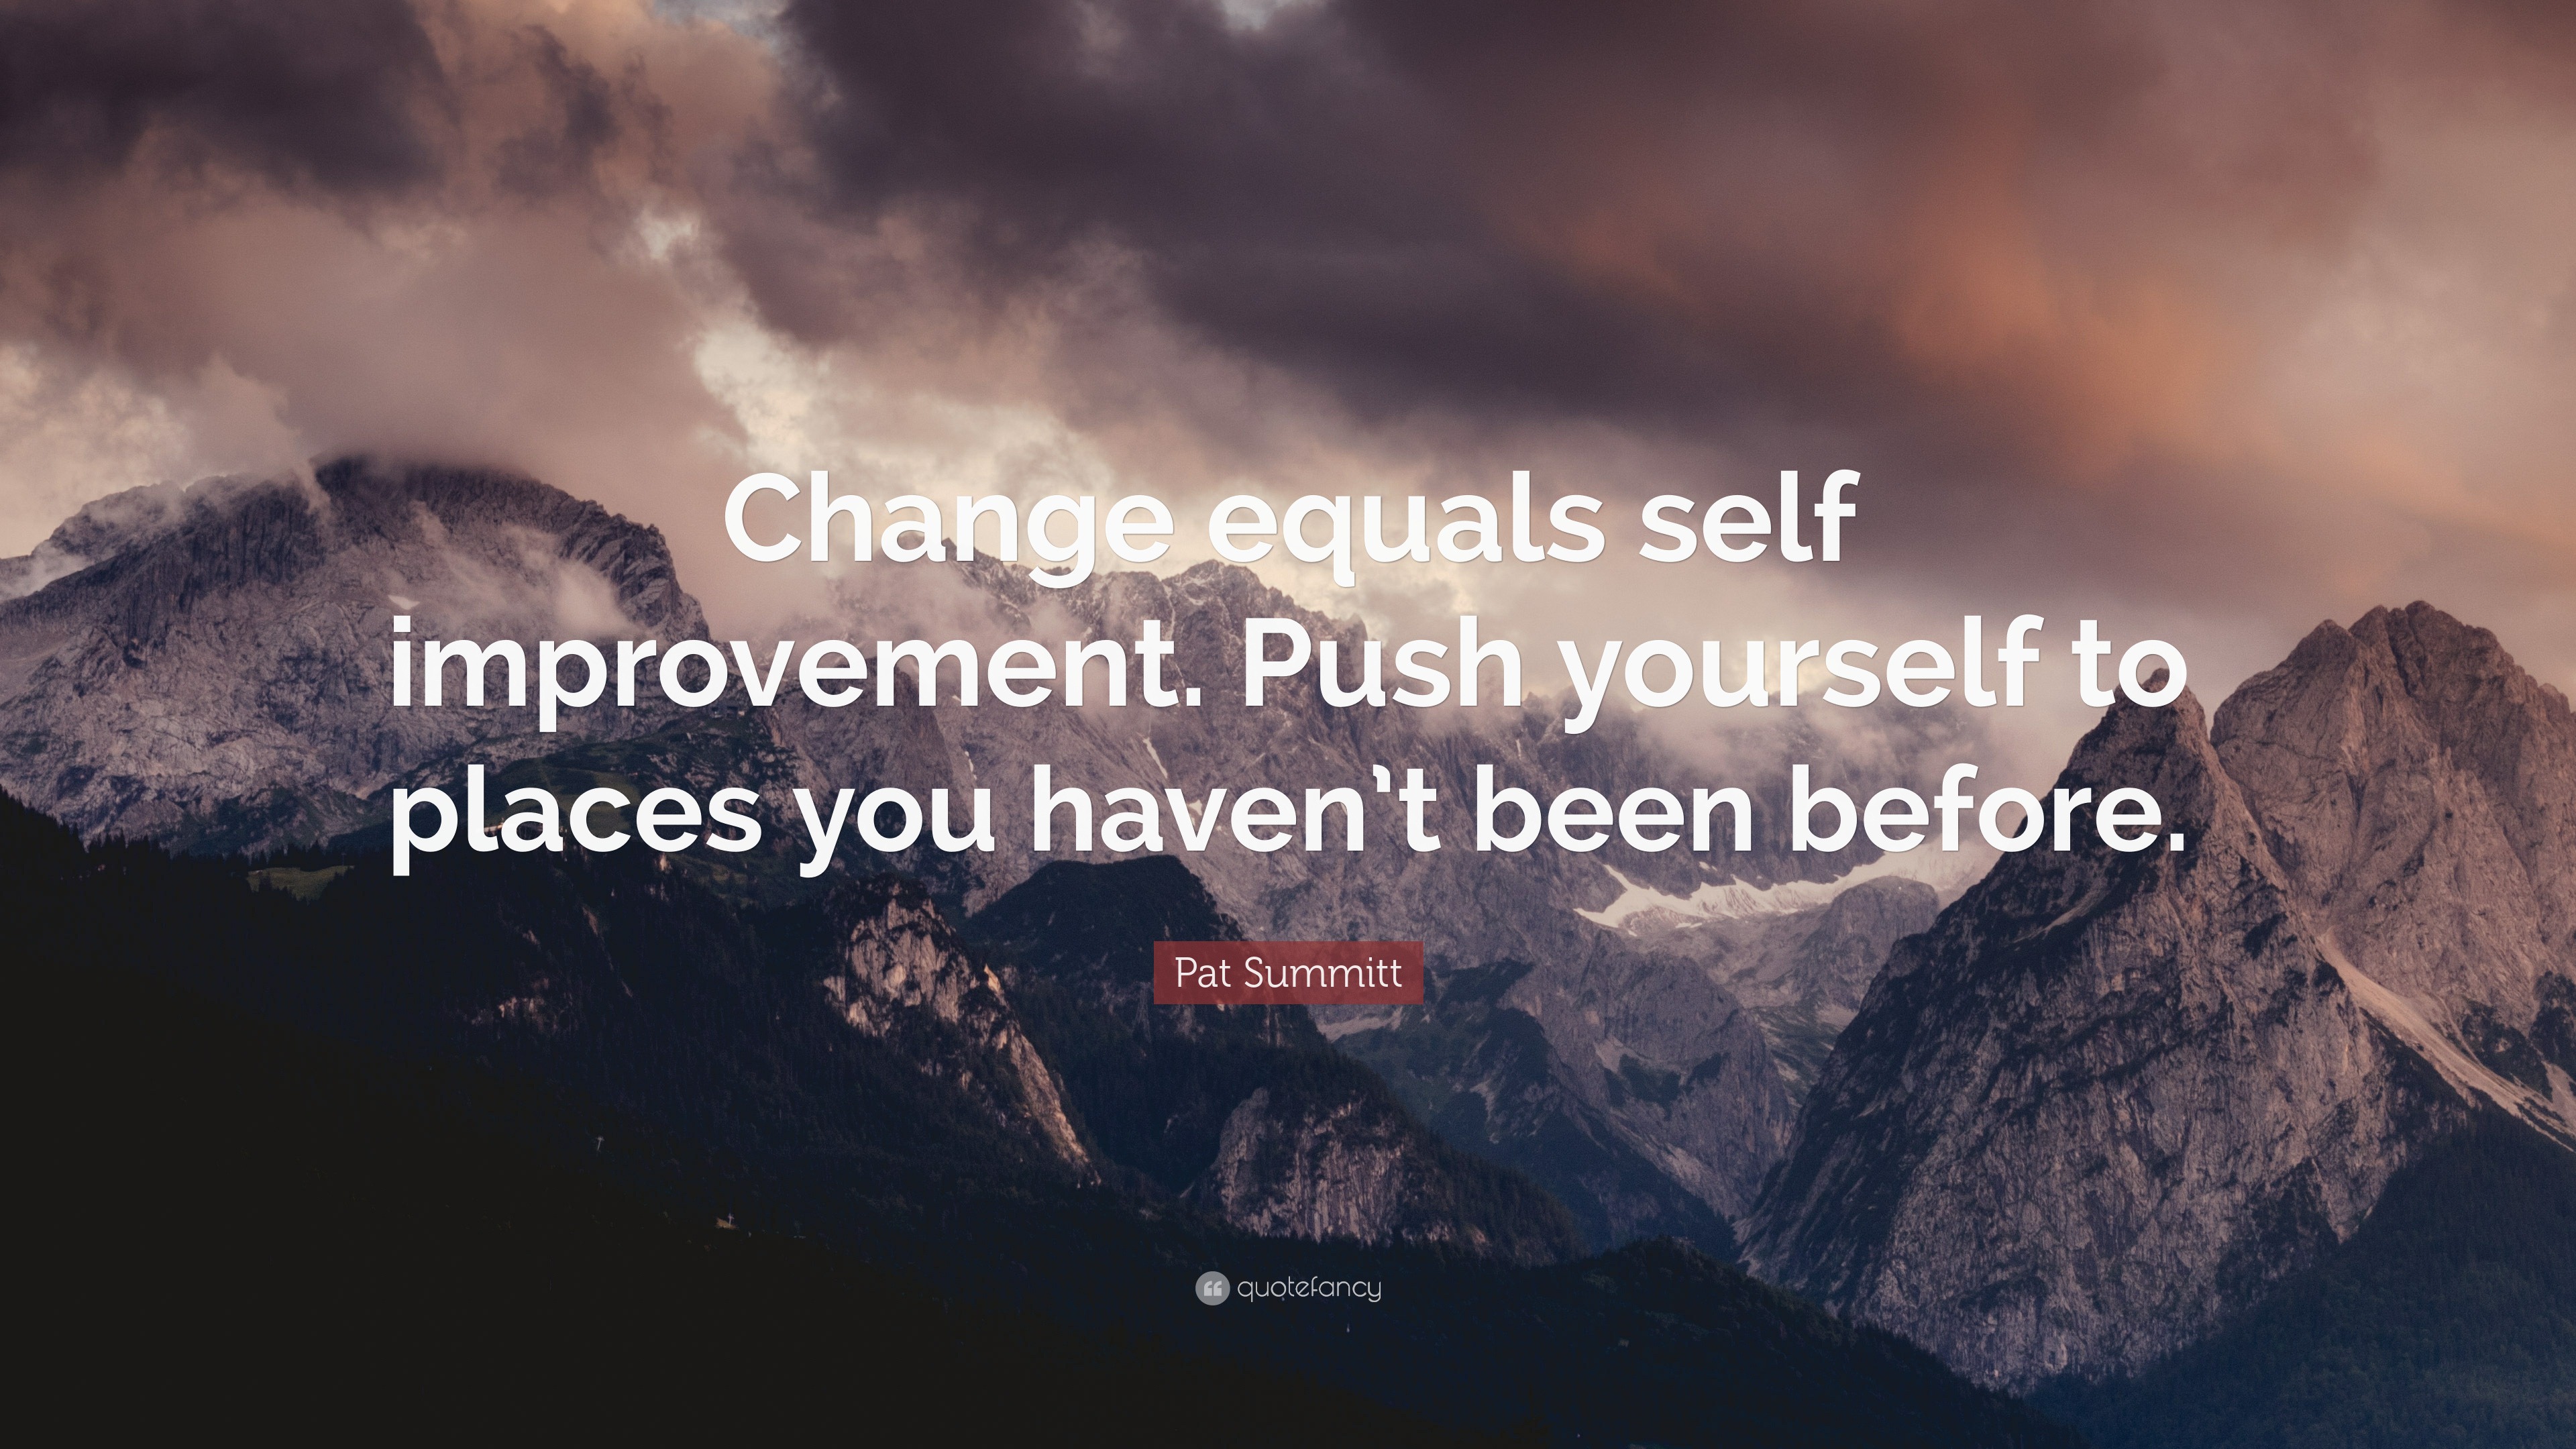 Pat Summitt Quote: “Change equals self improvement. Push yourself to ...